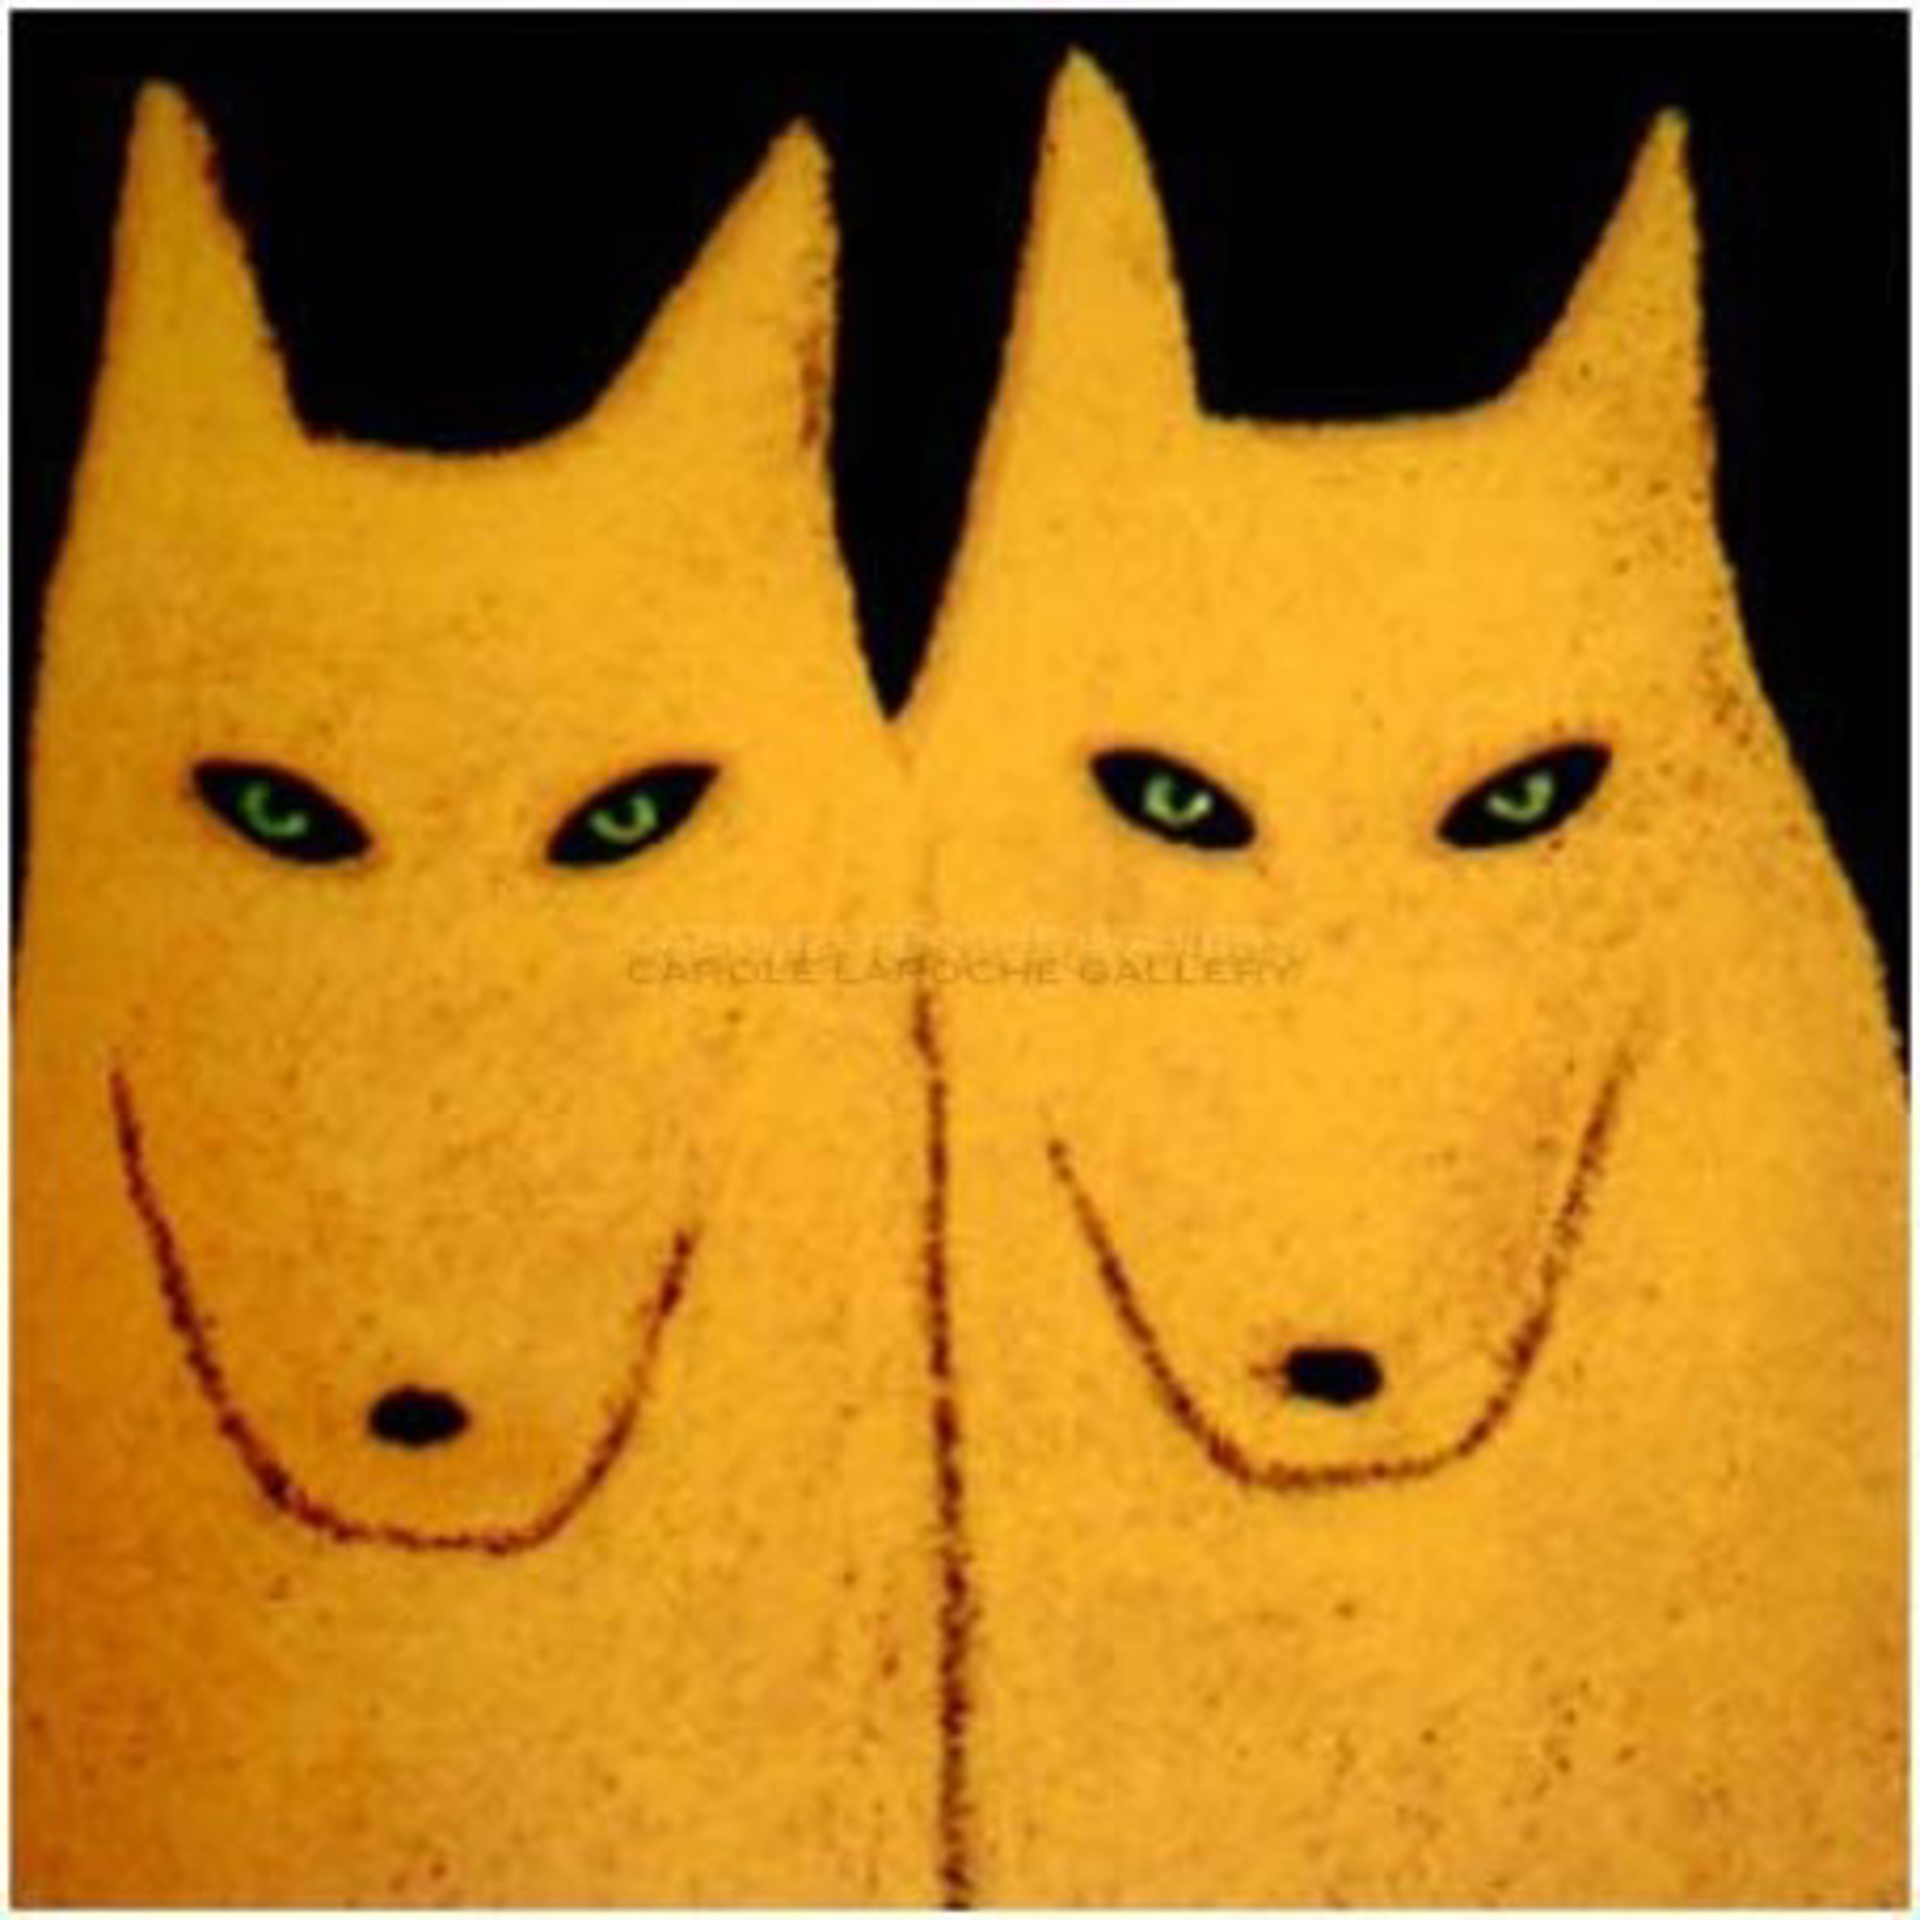 TWO YELLOW  WOLVES - limited edition giclee on paper w/frame size of 21"X21" by Carole LaRoche